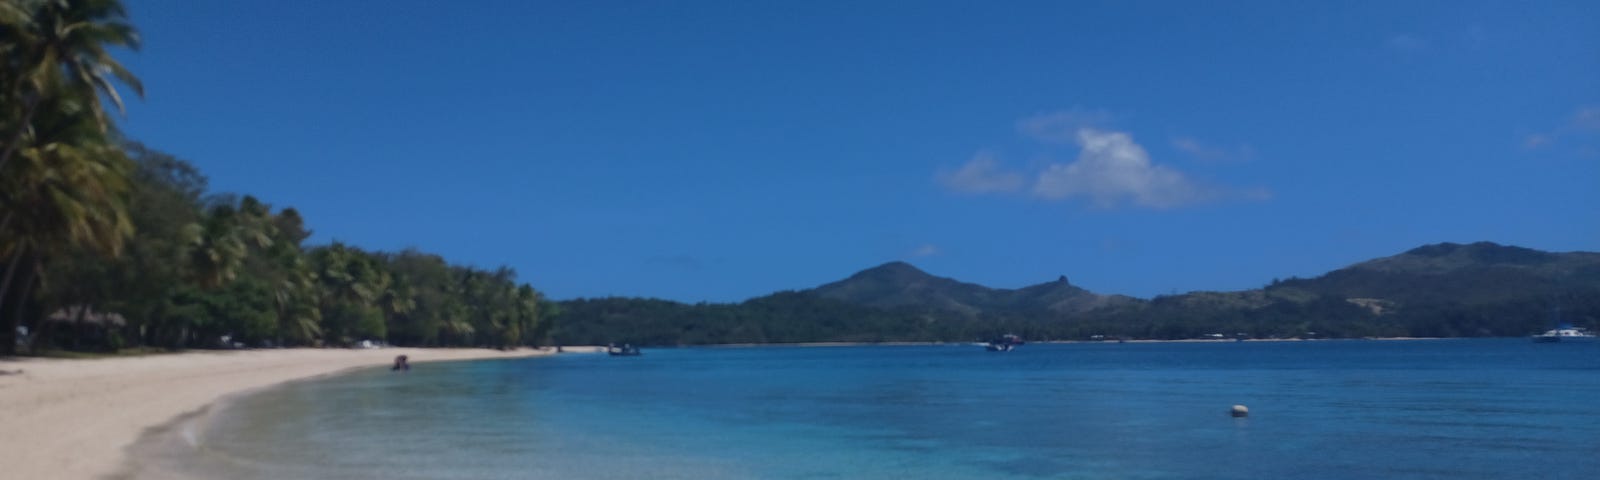 A tropical island beach with blue waters, white sand, boats near shore.